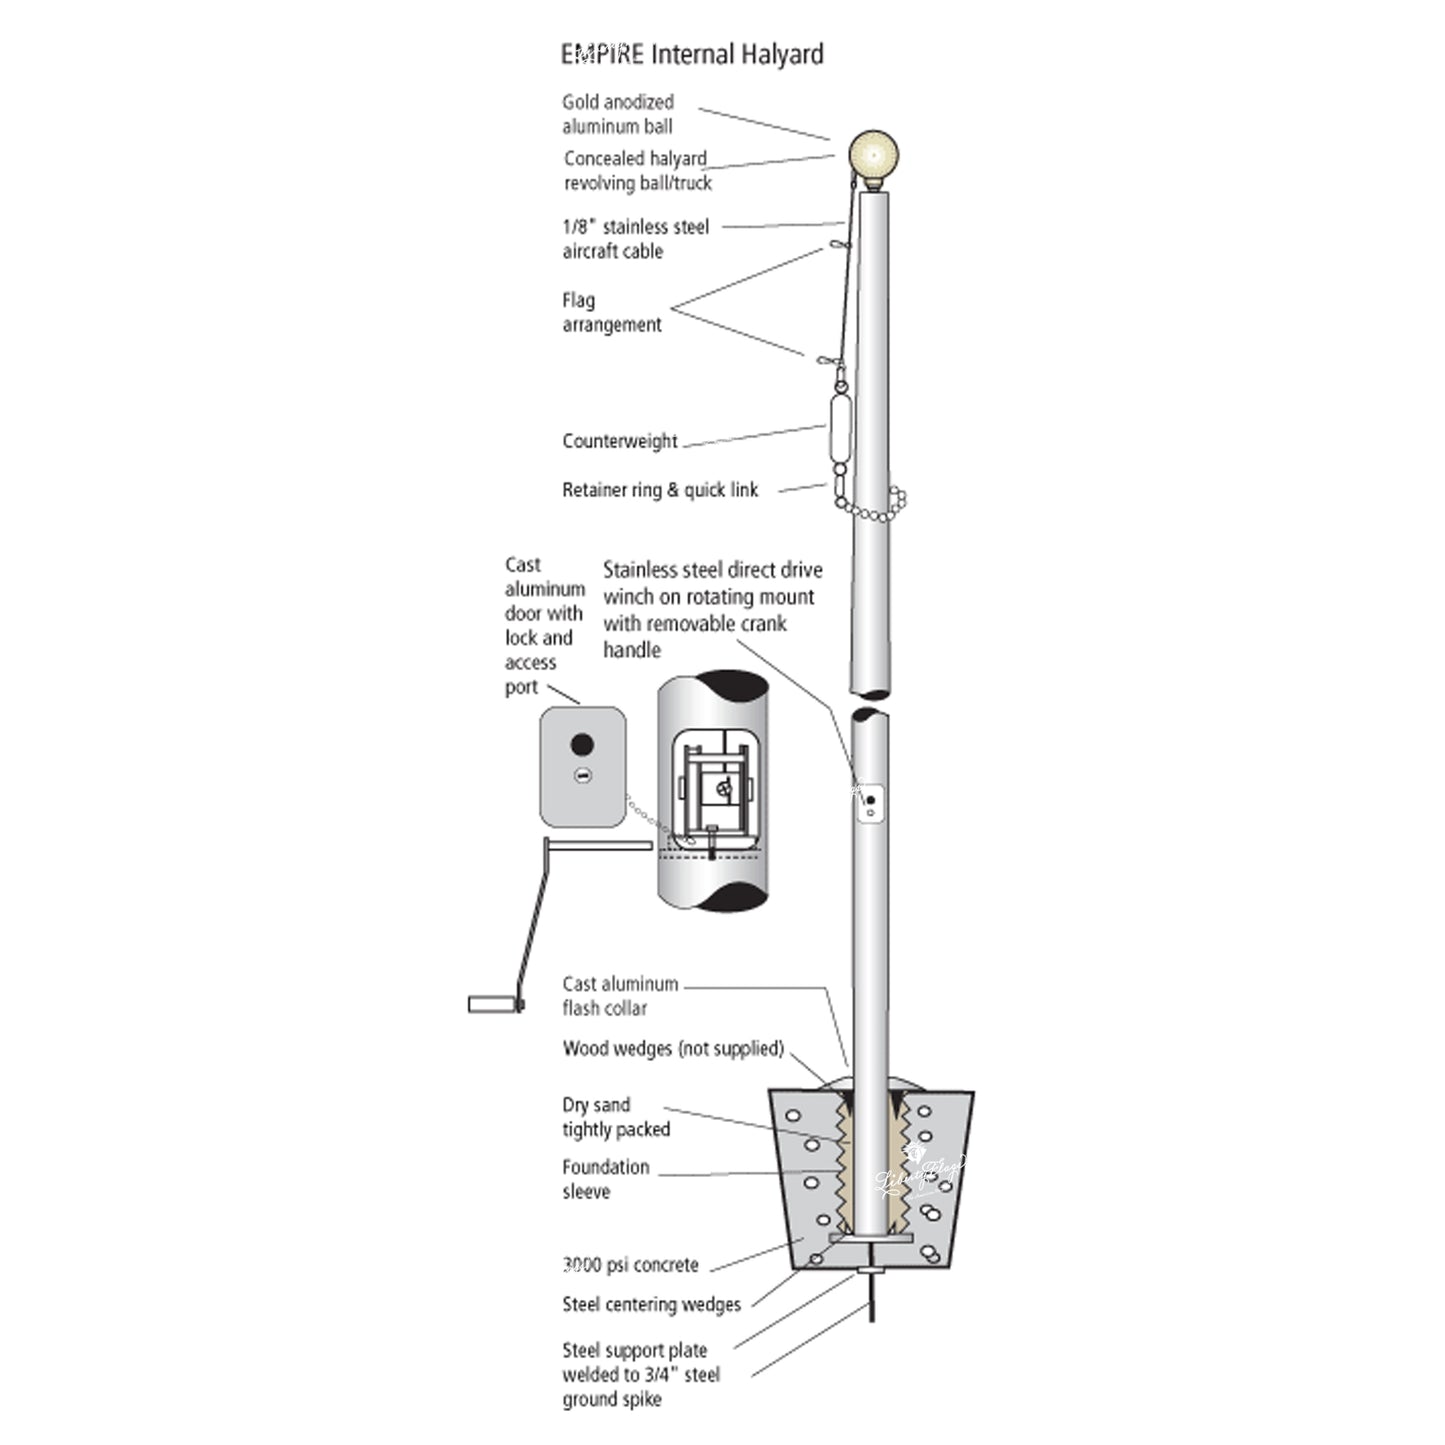 Empire Commercial Flagpole - Internal Halyard